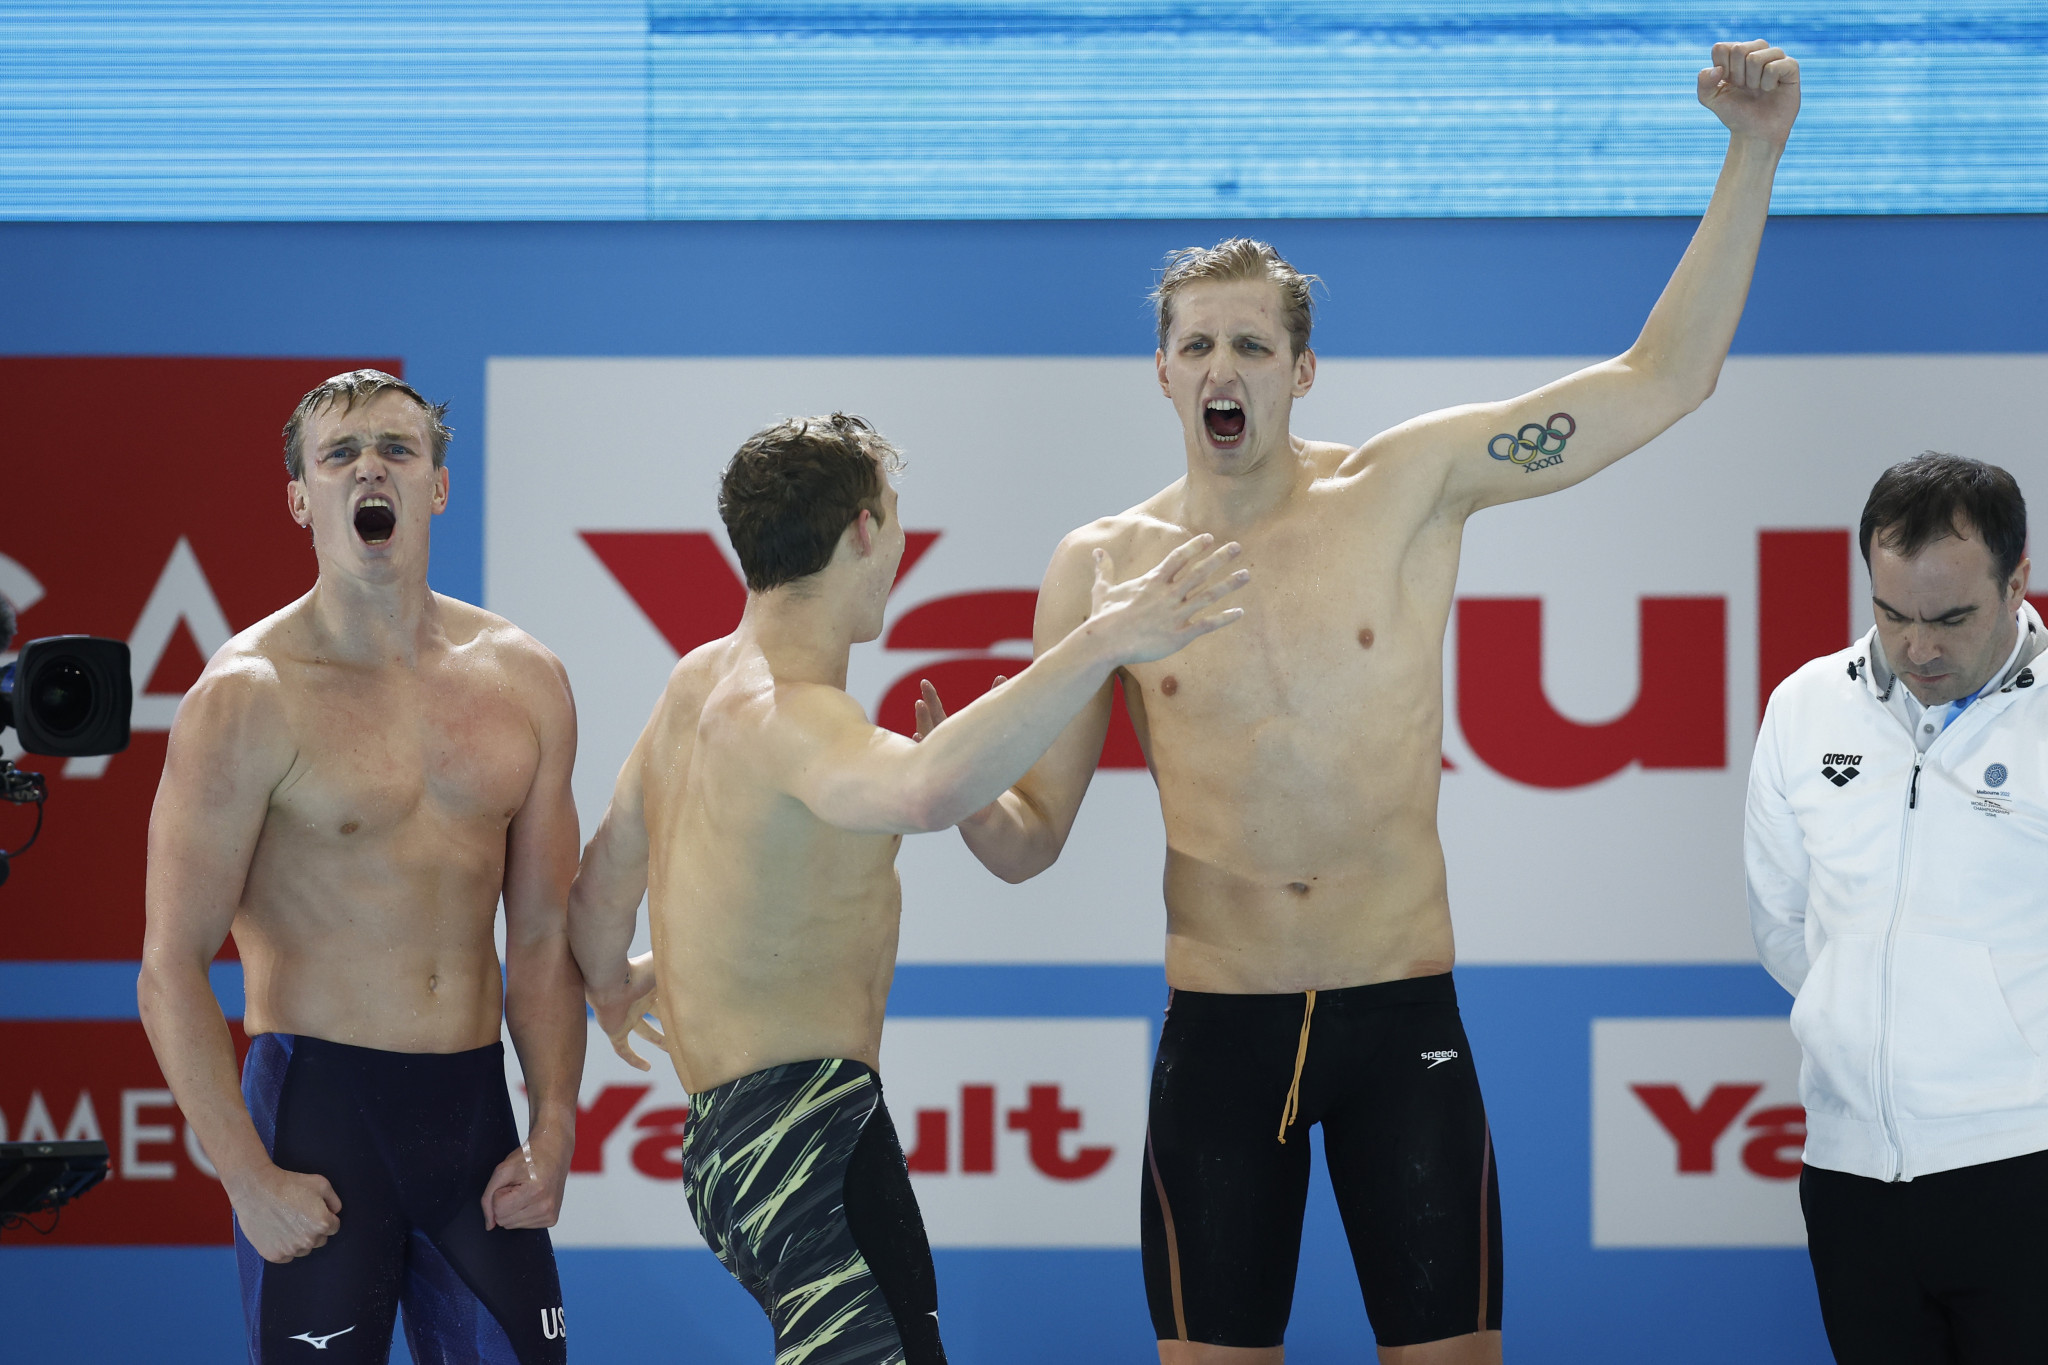 The US team roar with delight after capturing the men's 4x200m freestyle relay crown ©Getty Images